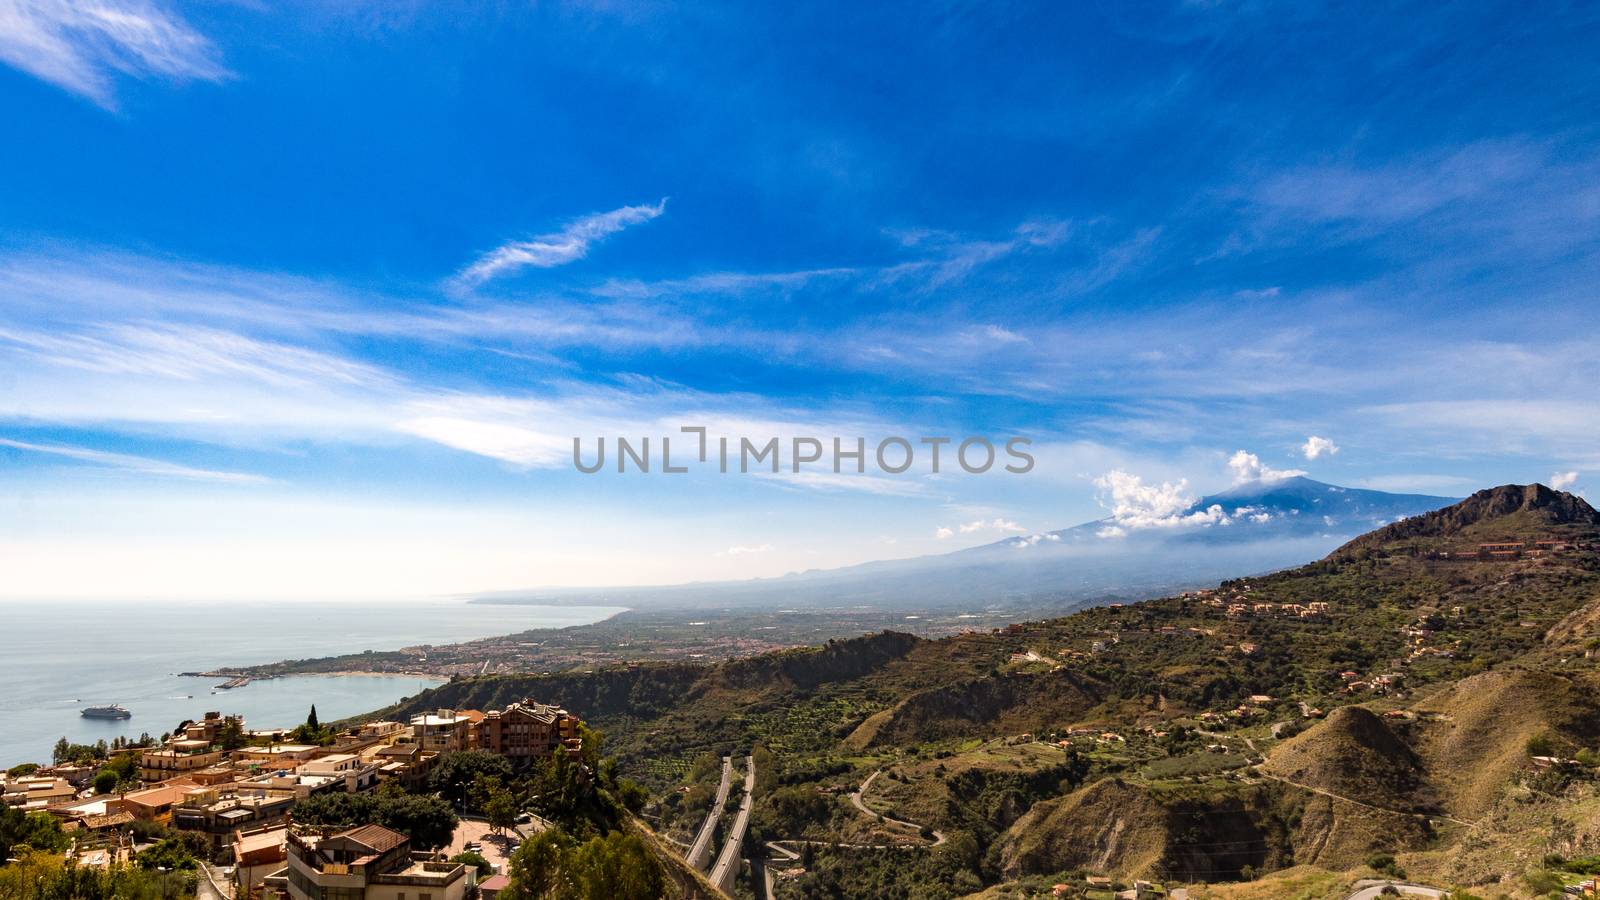 View from Taormina by alanstix64